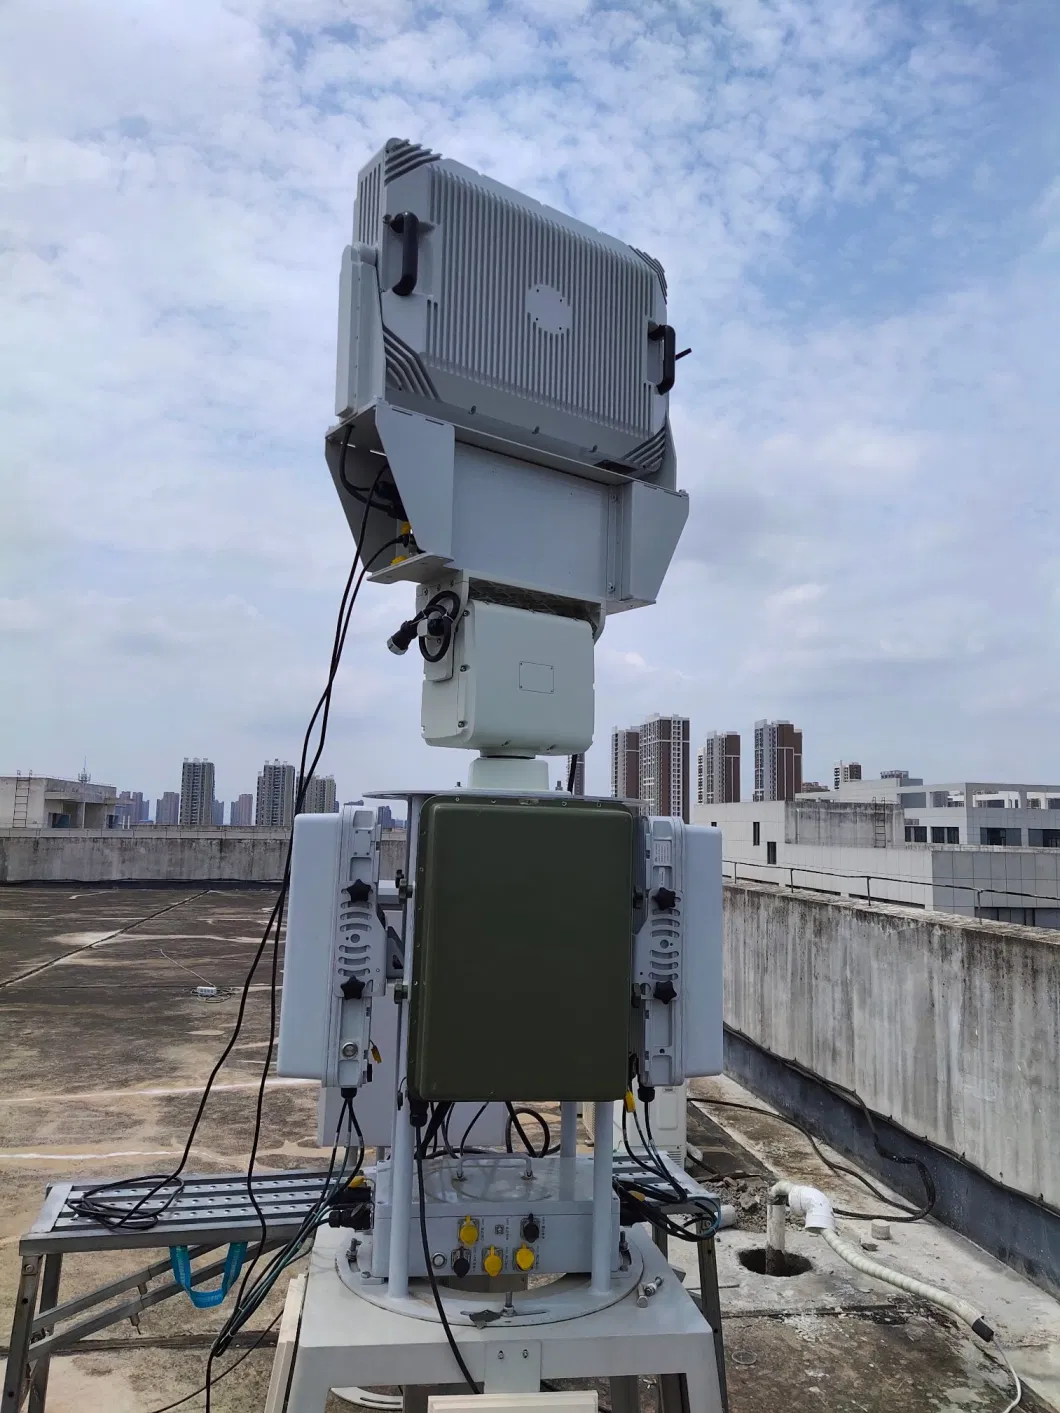 Low Altitude Surveillance Radar for Oil and Gas Station Perimeter Protection